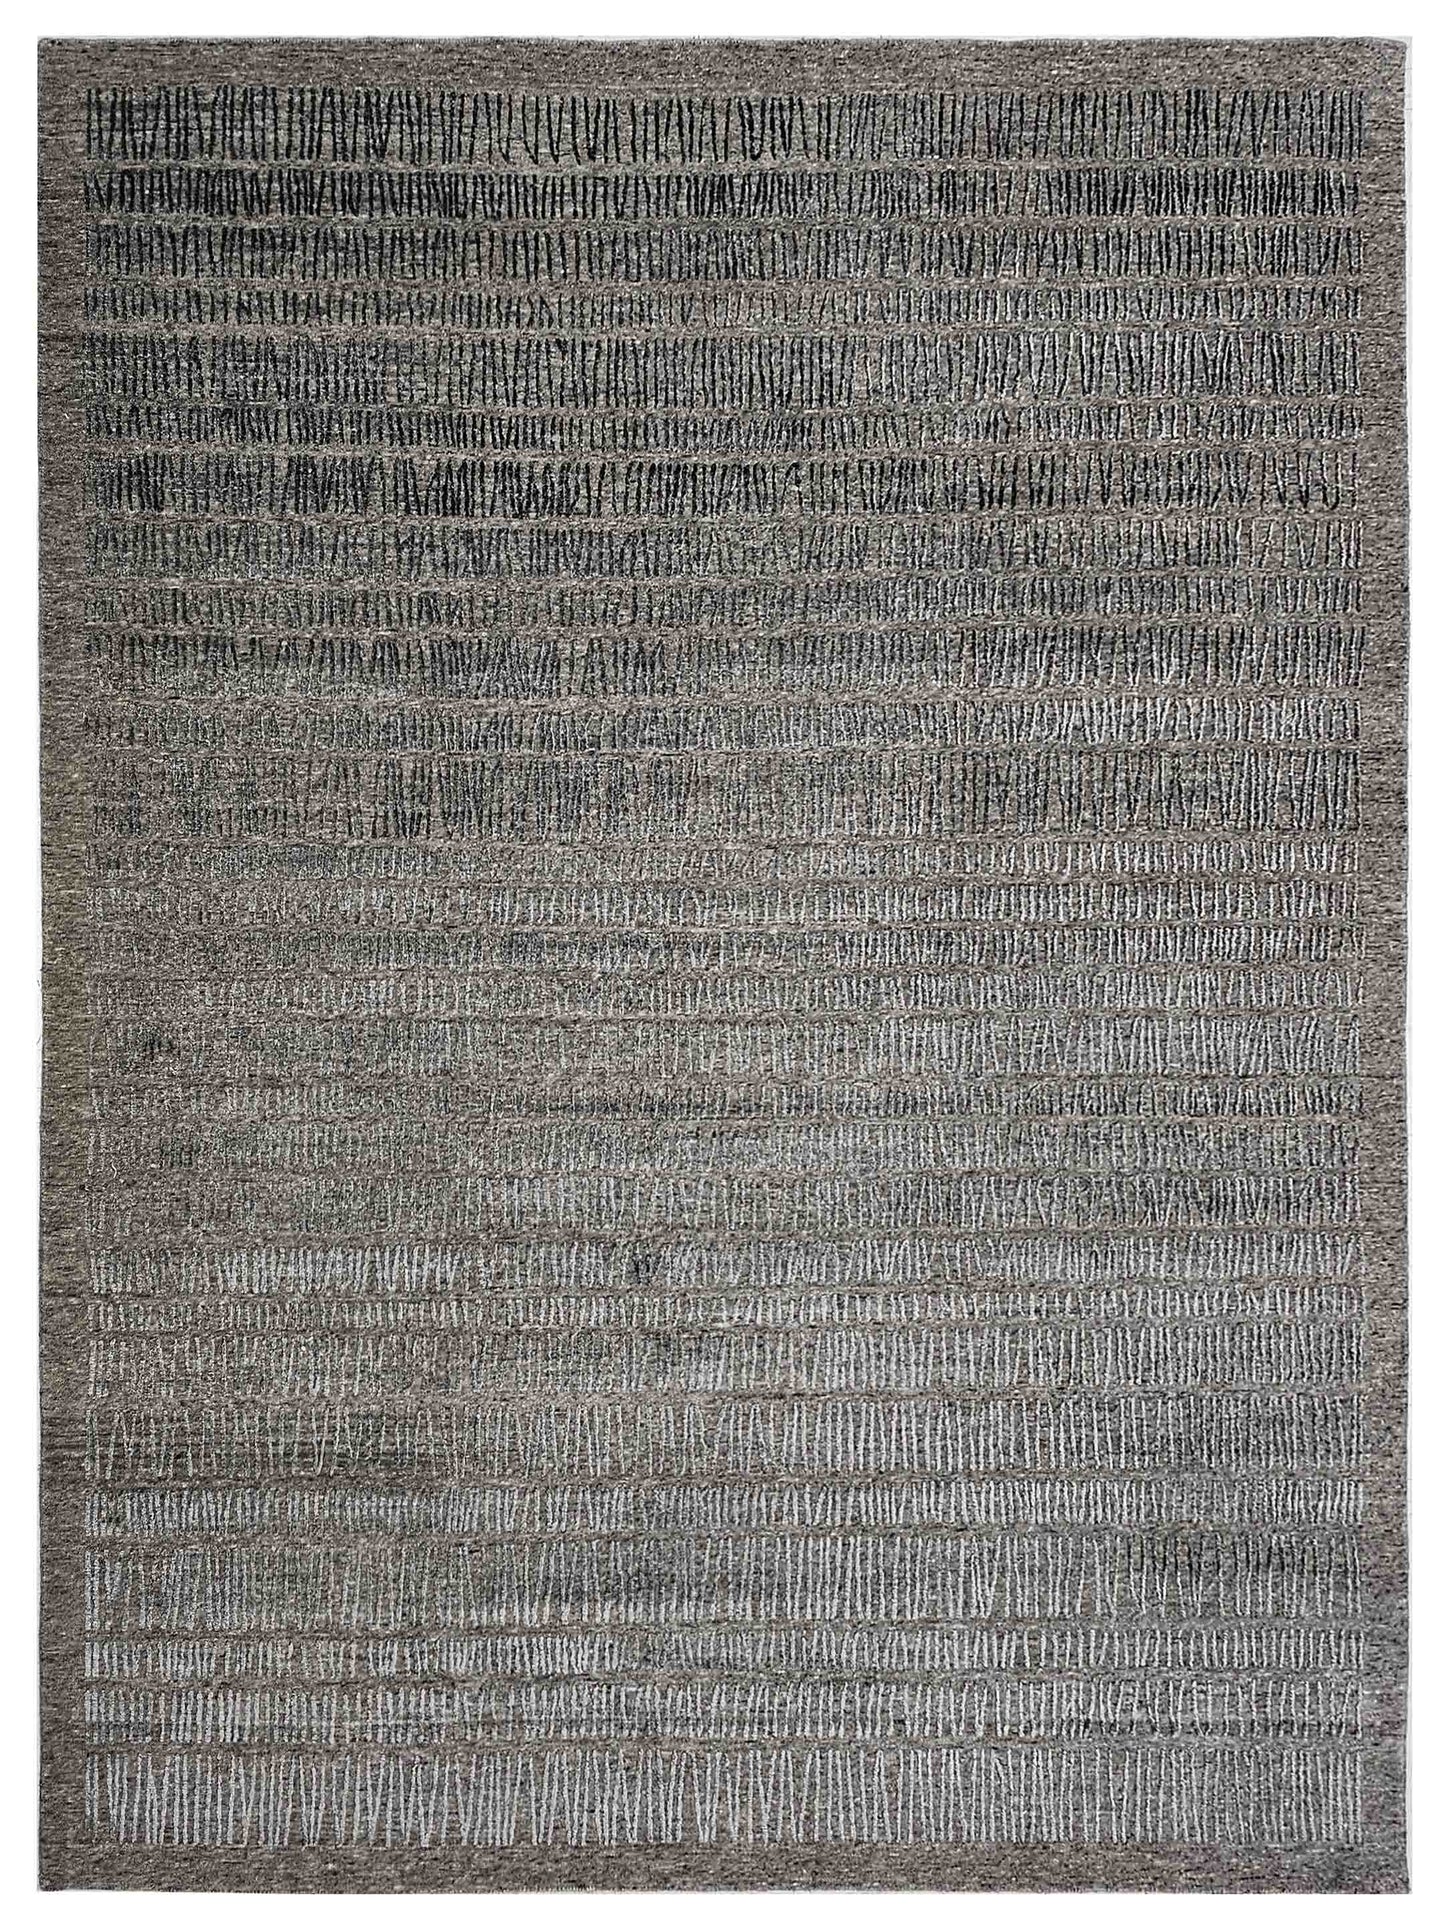 Artisan Mary MN-317 Natural Contemporary Knotted Rug